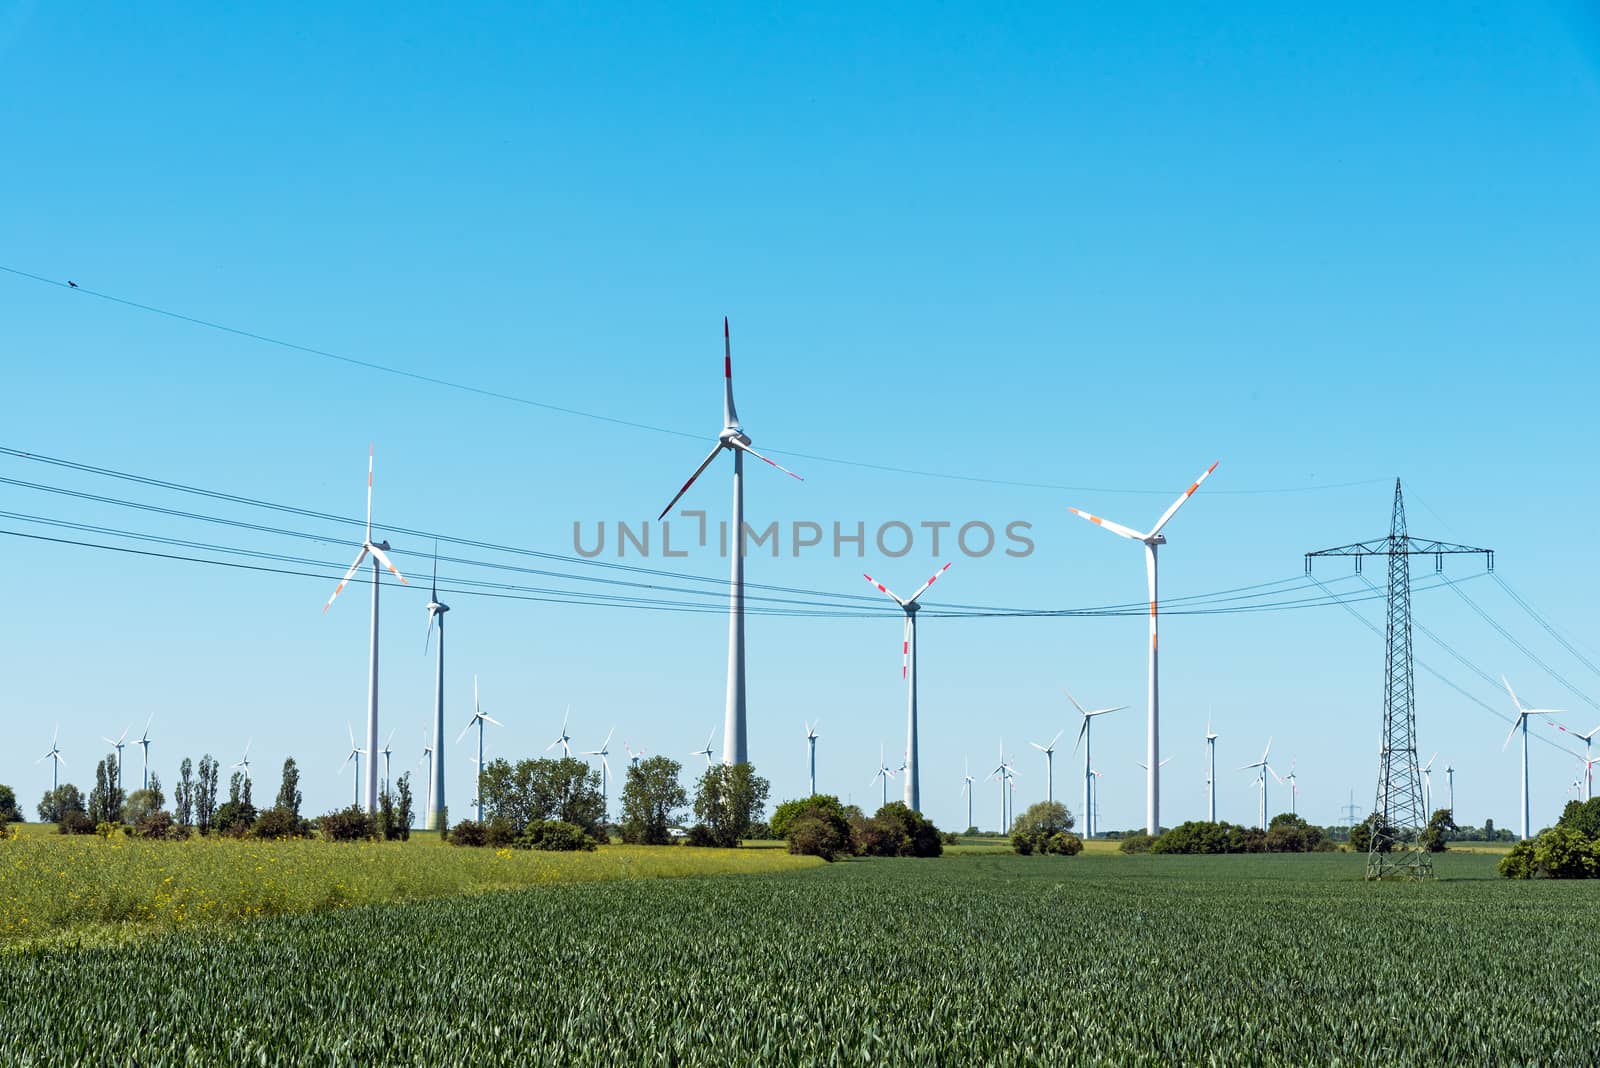 Overhead cables and windwheels in Germany by elxeneize